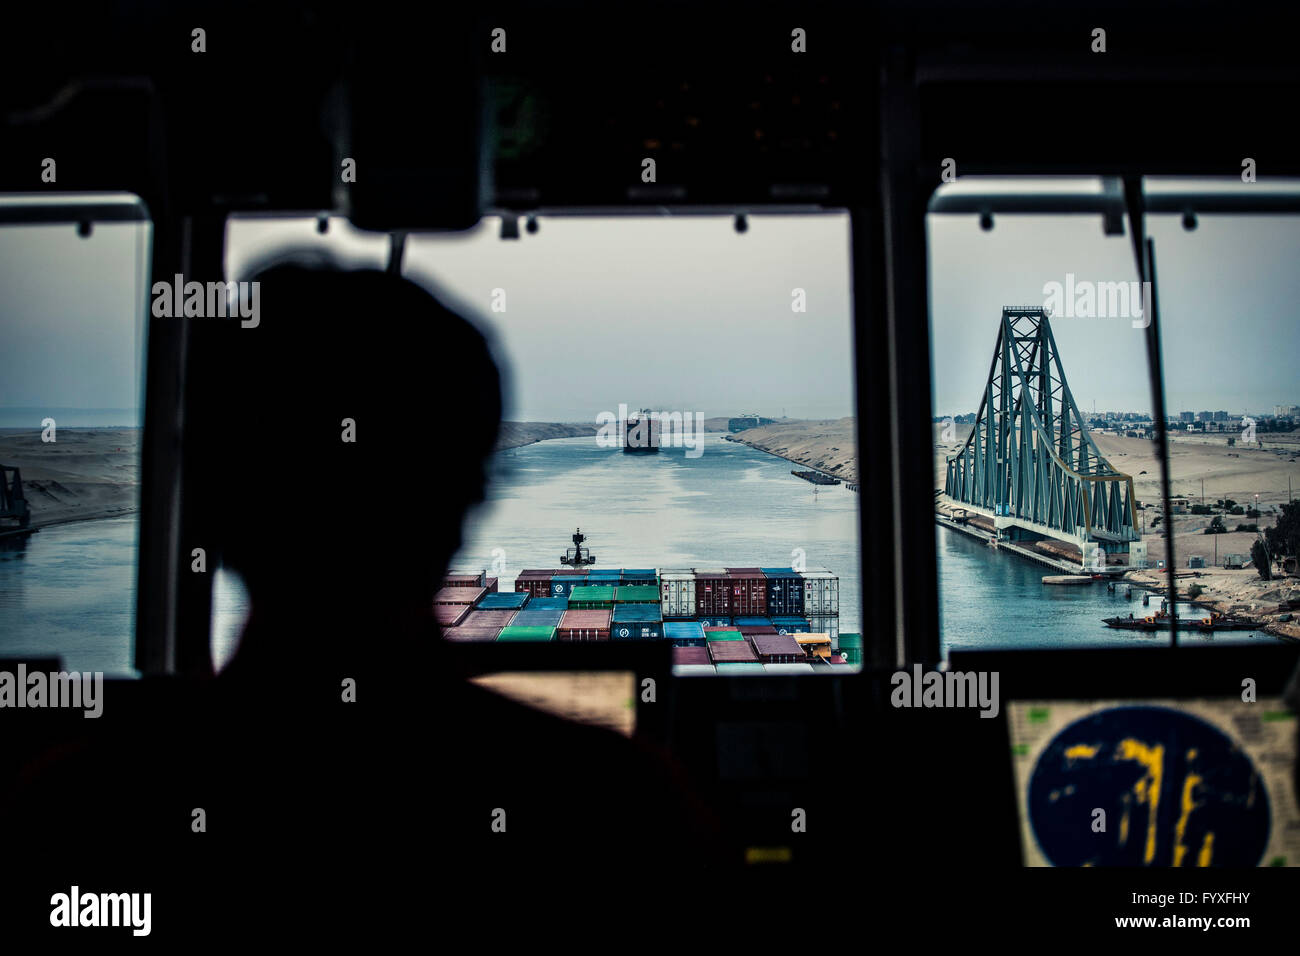 First Officer of a container ship helping guide the vessel through the Suez Canal Stock Photo